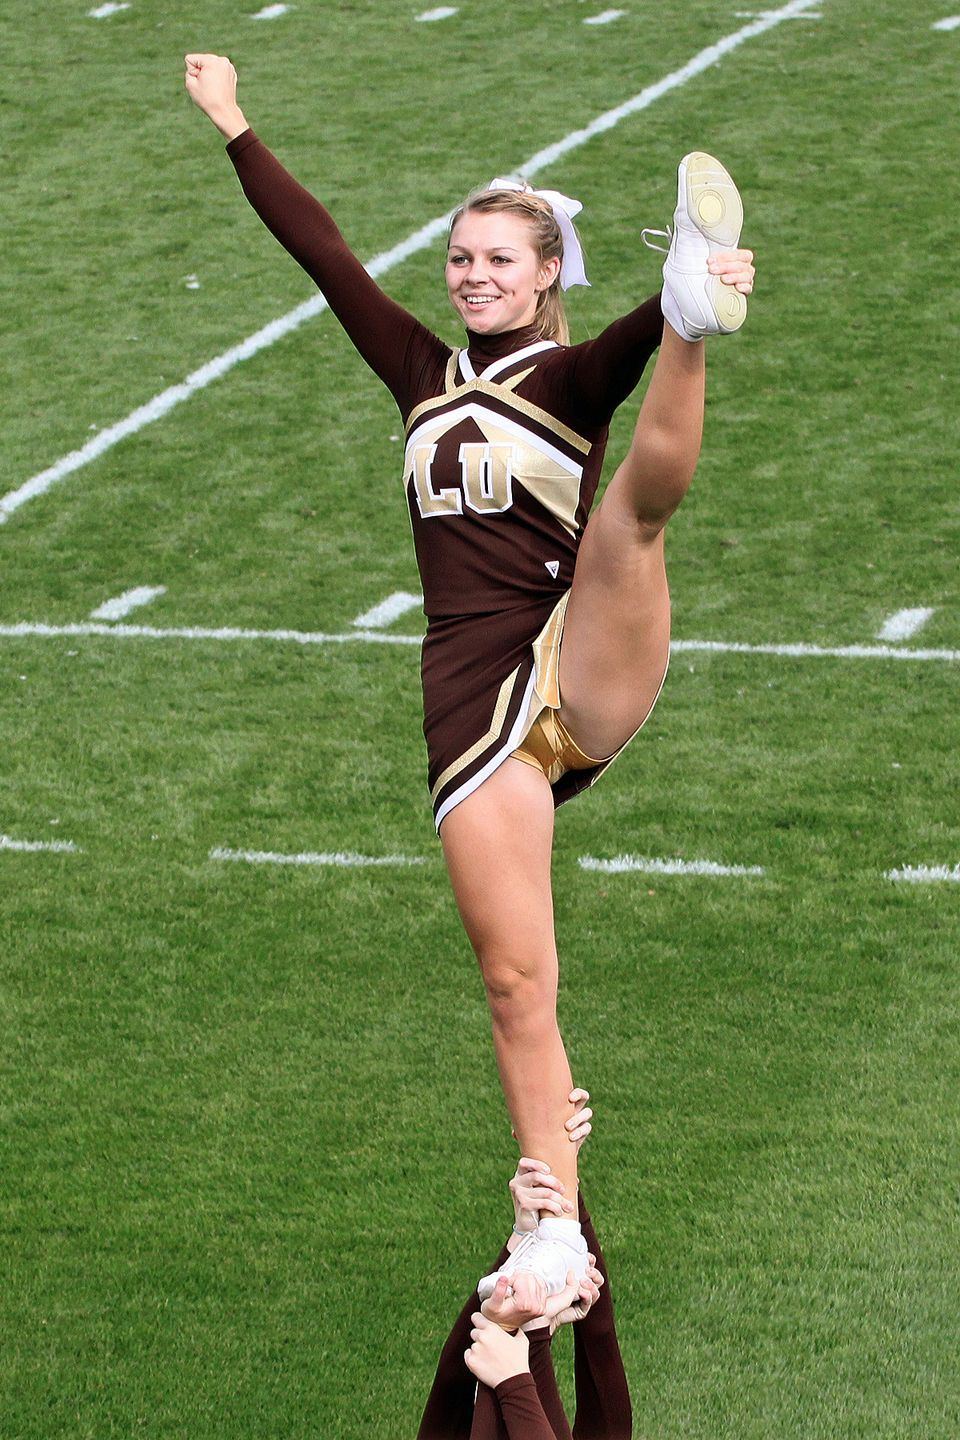 Candid cheerleader upskirt pictures  pic